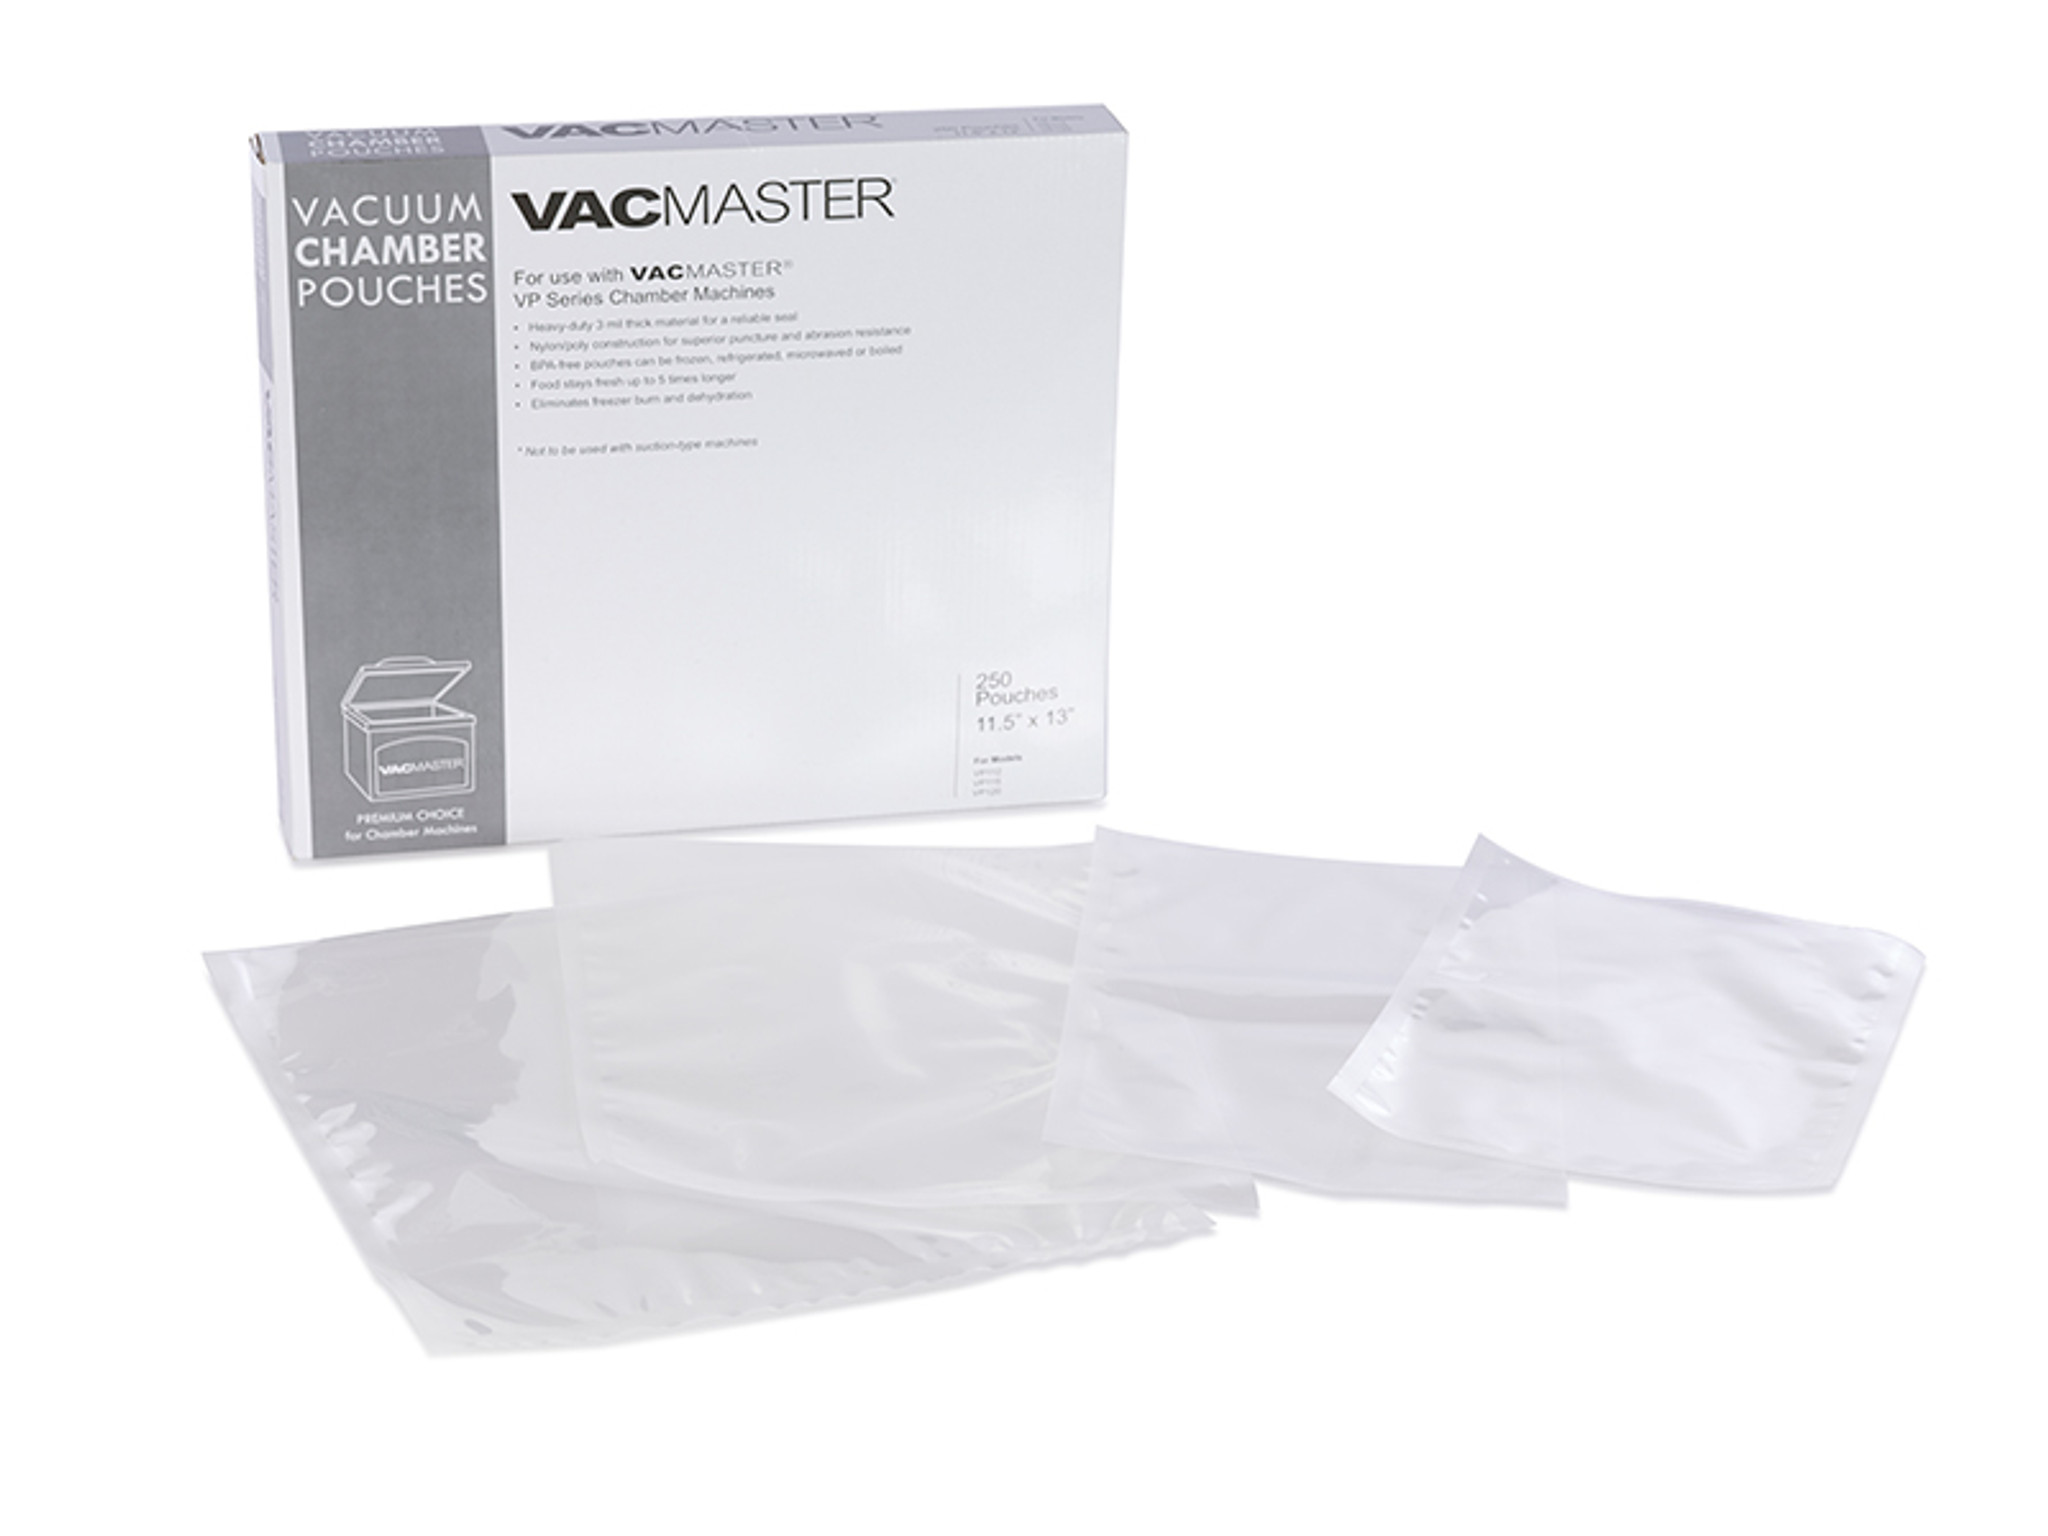 Craftworx Vacuum Bags 100 Count | Size 8 x 12